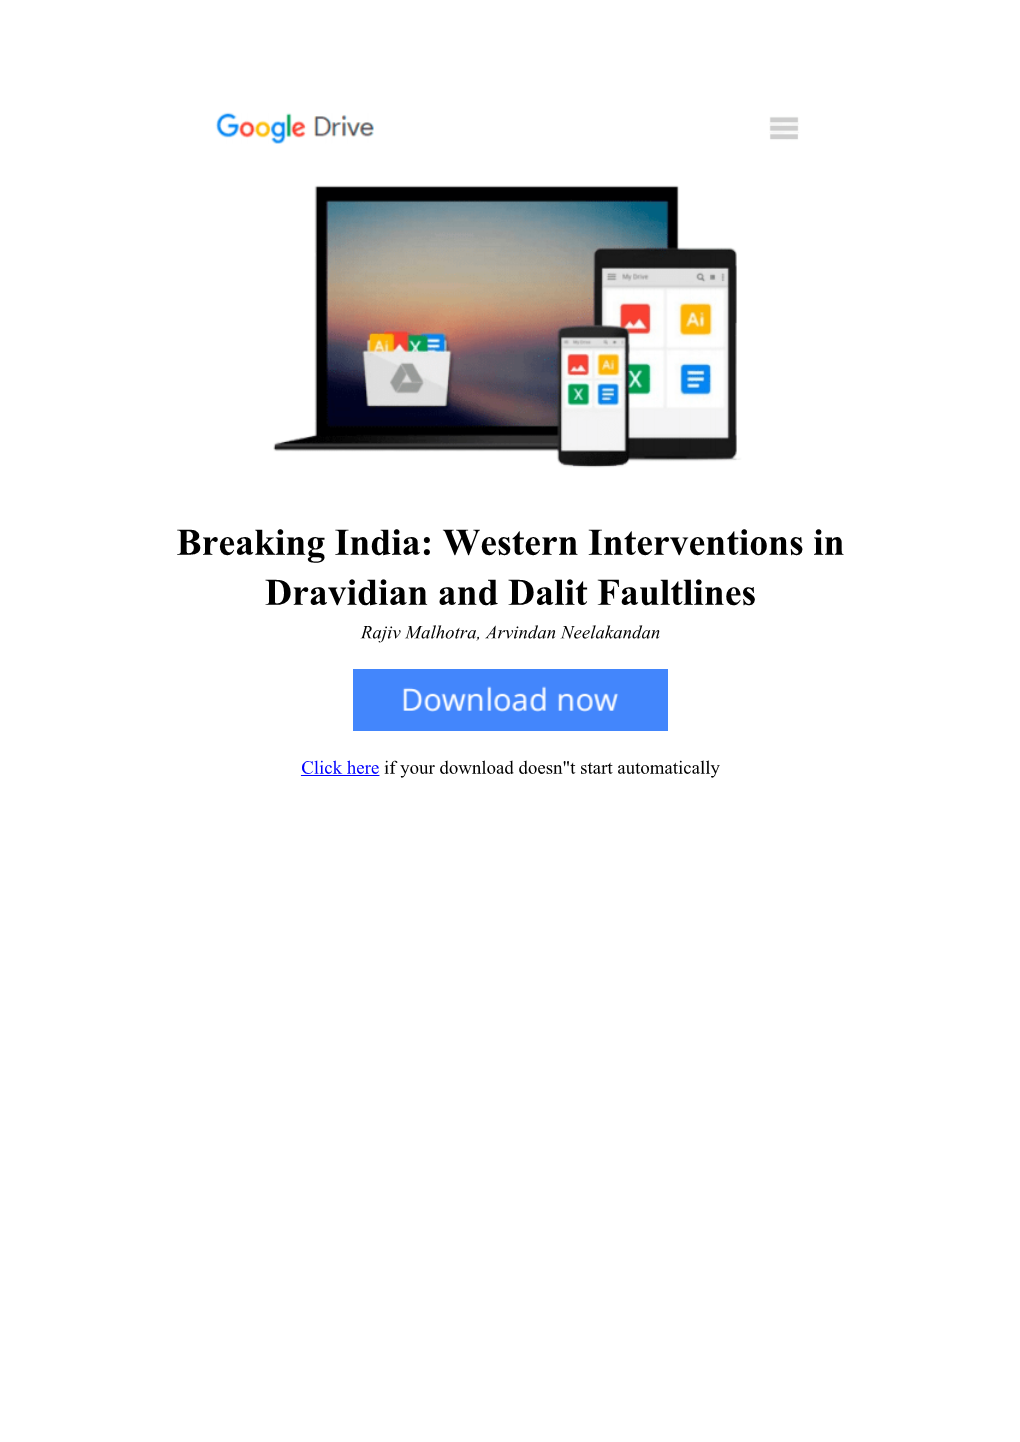 [LERF]⋙ Breaking India: Western Interventions in Dravidian and Dalit